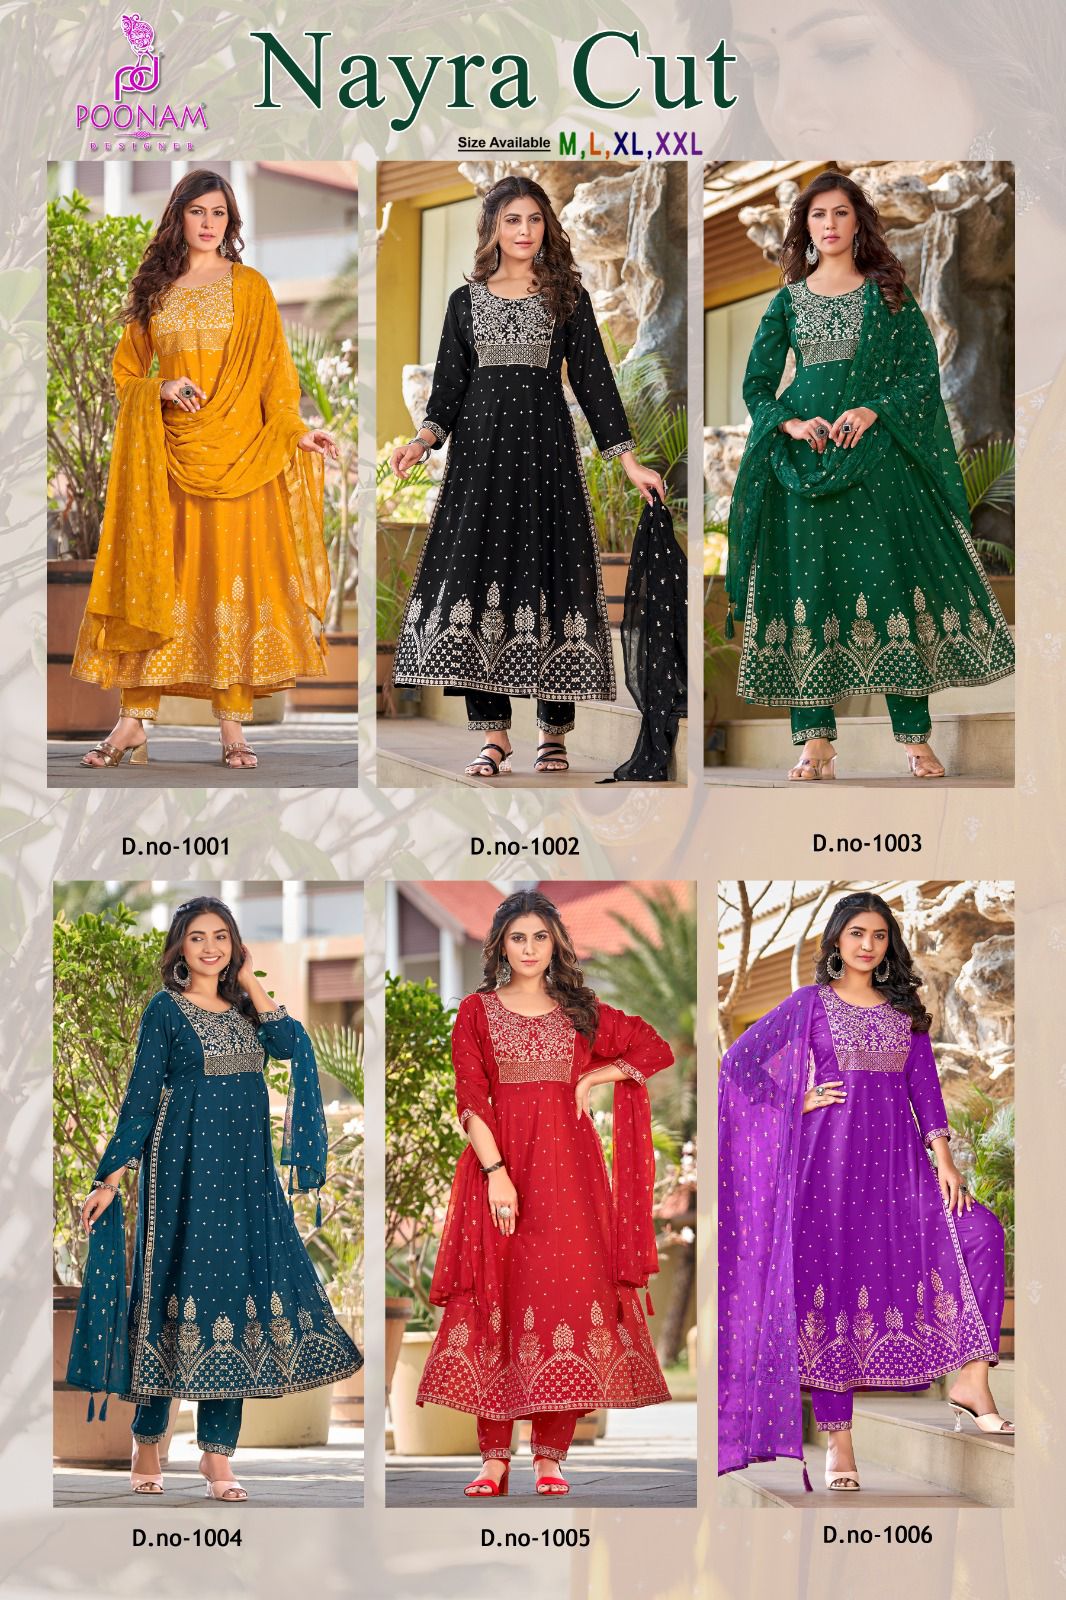 Poonam Nayra Cut collection 5